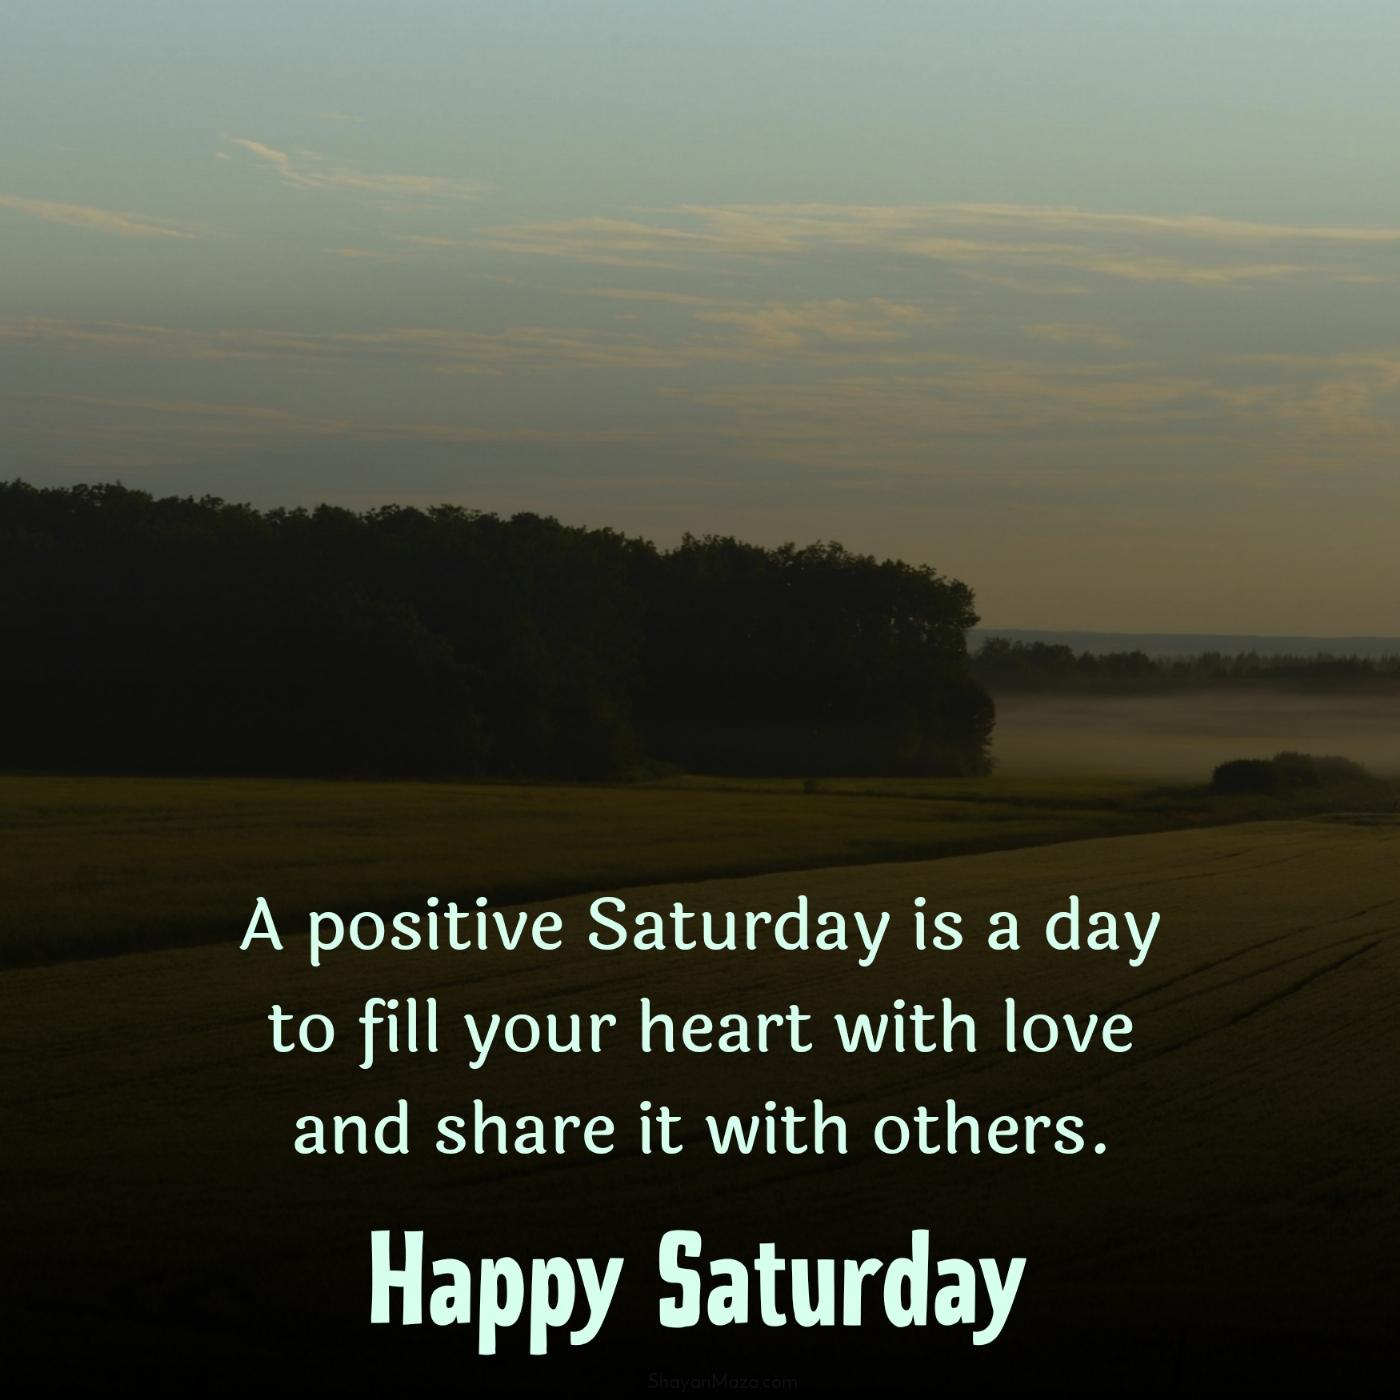 A positive Saturday is a day to fill your heart with love